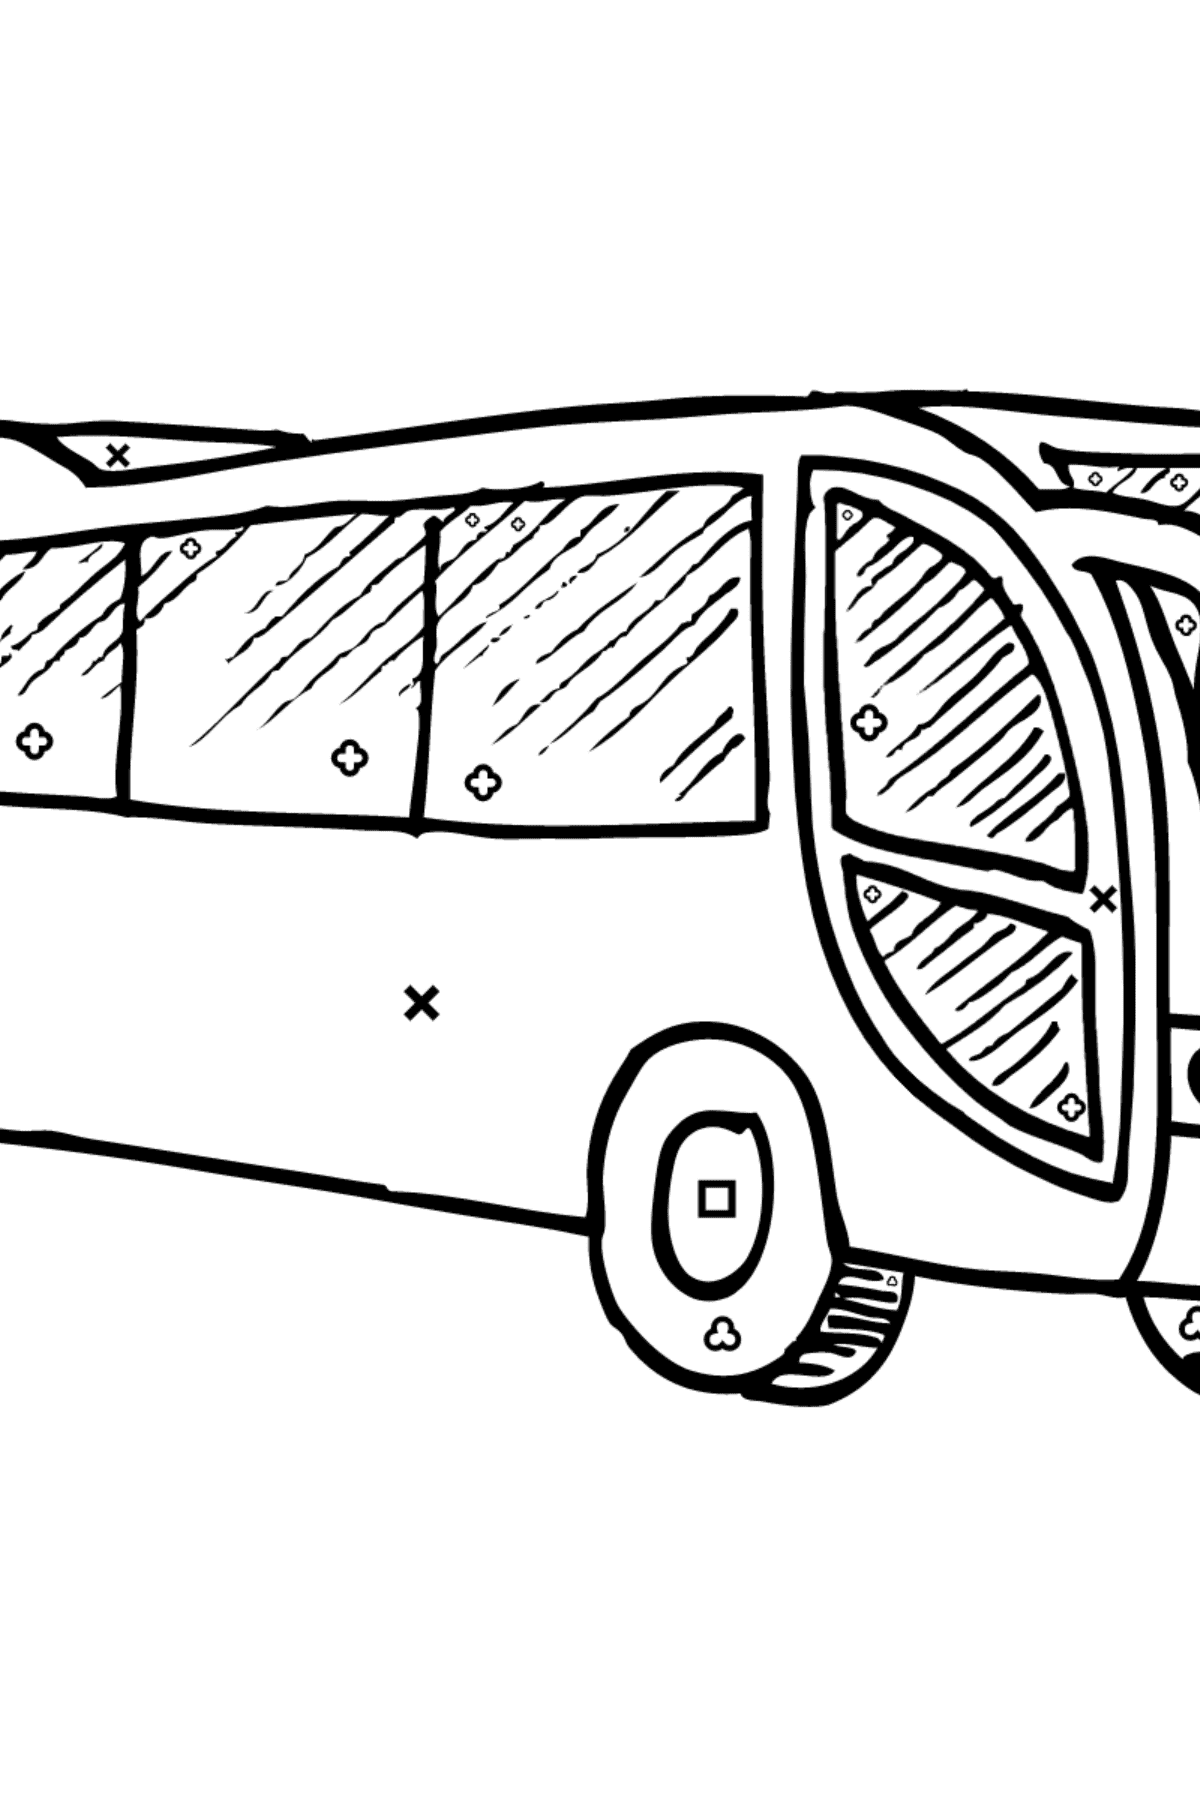 Coloring Page - A Bus is Having Rest - Coloring by Symbols and Geometric Shapes for Kids